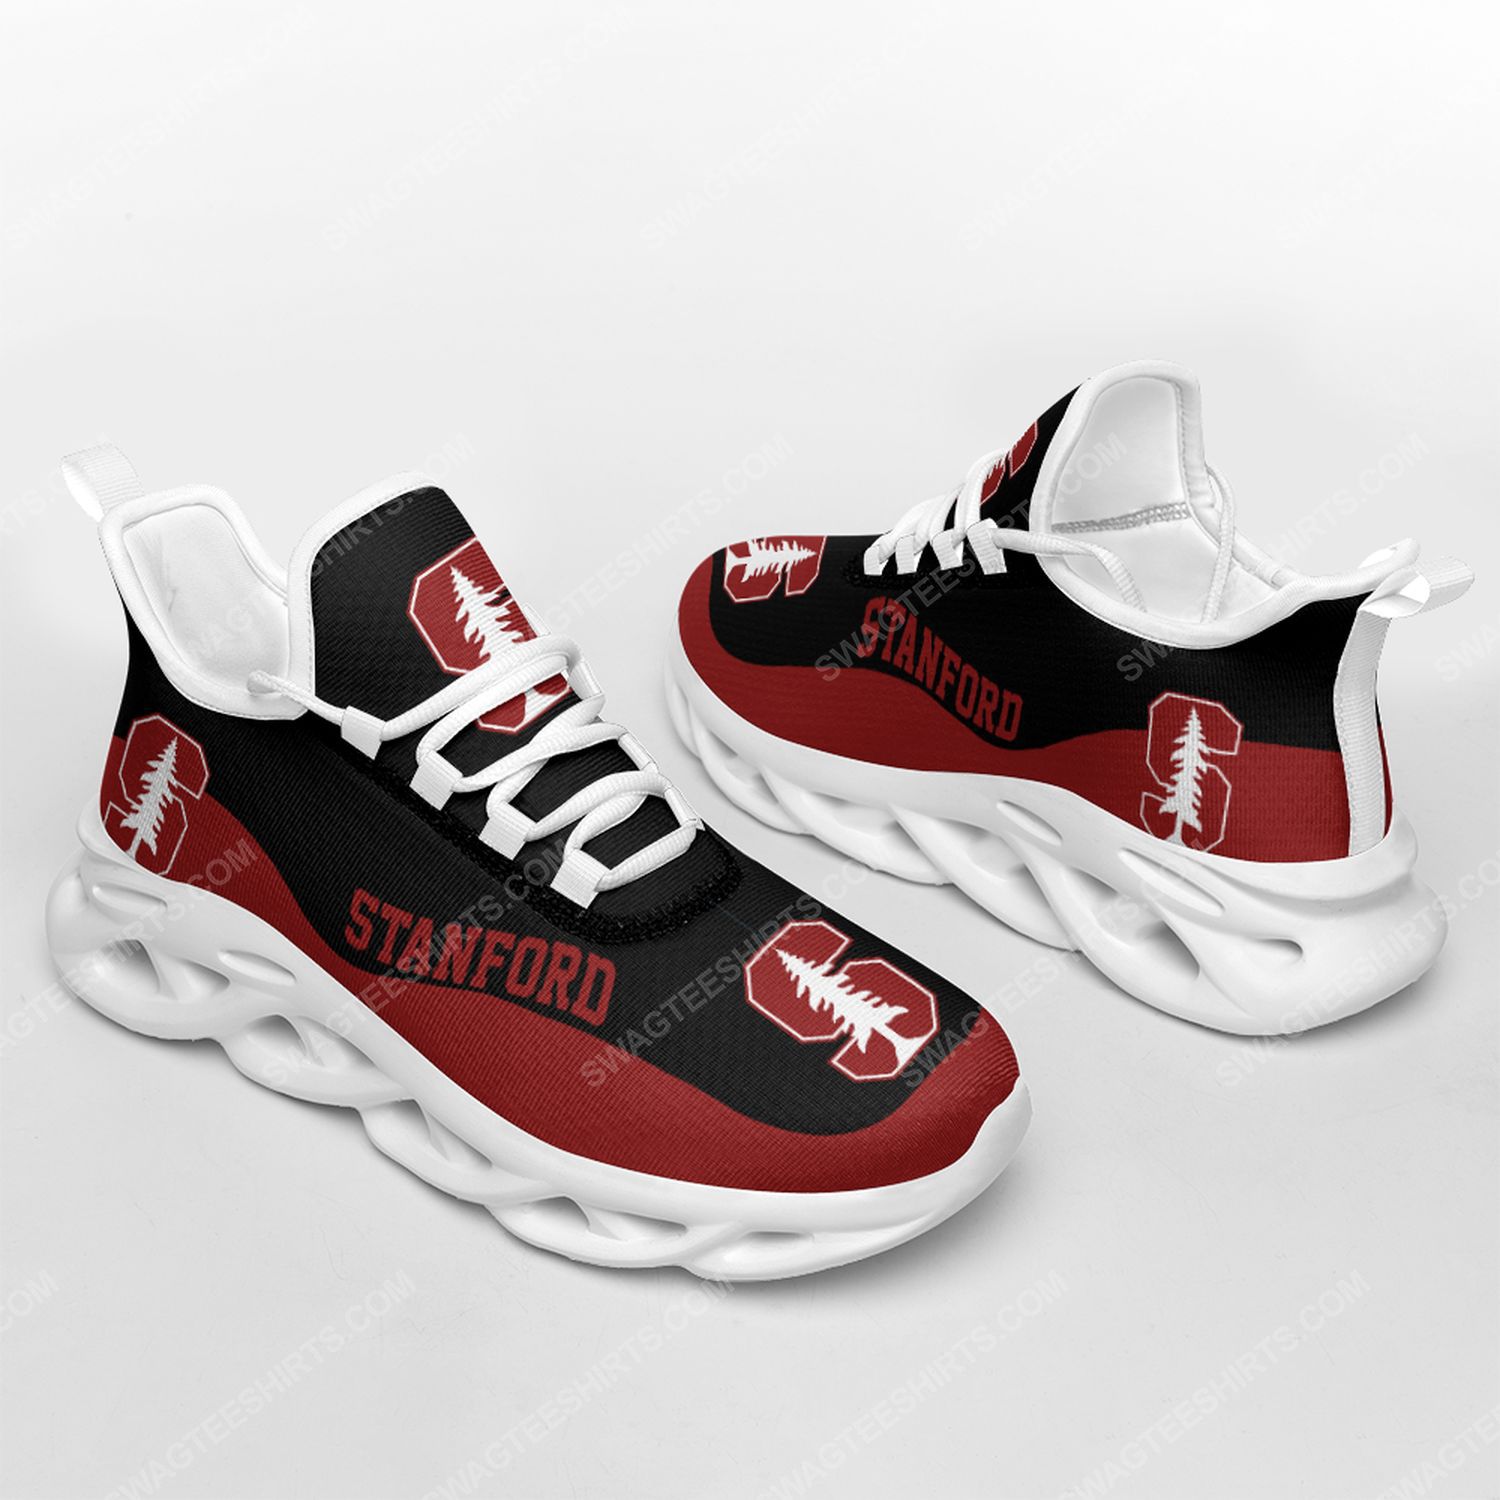 [special edition] The stanford cardinal football team max soul shoes – Maria